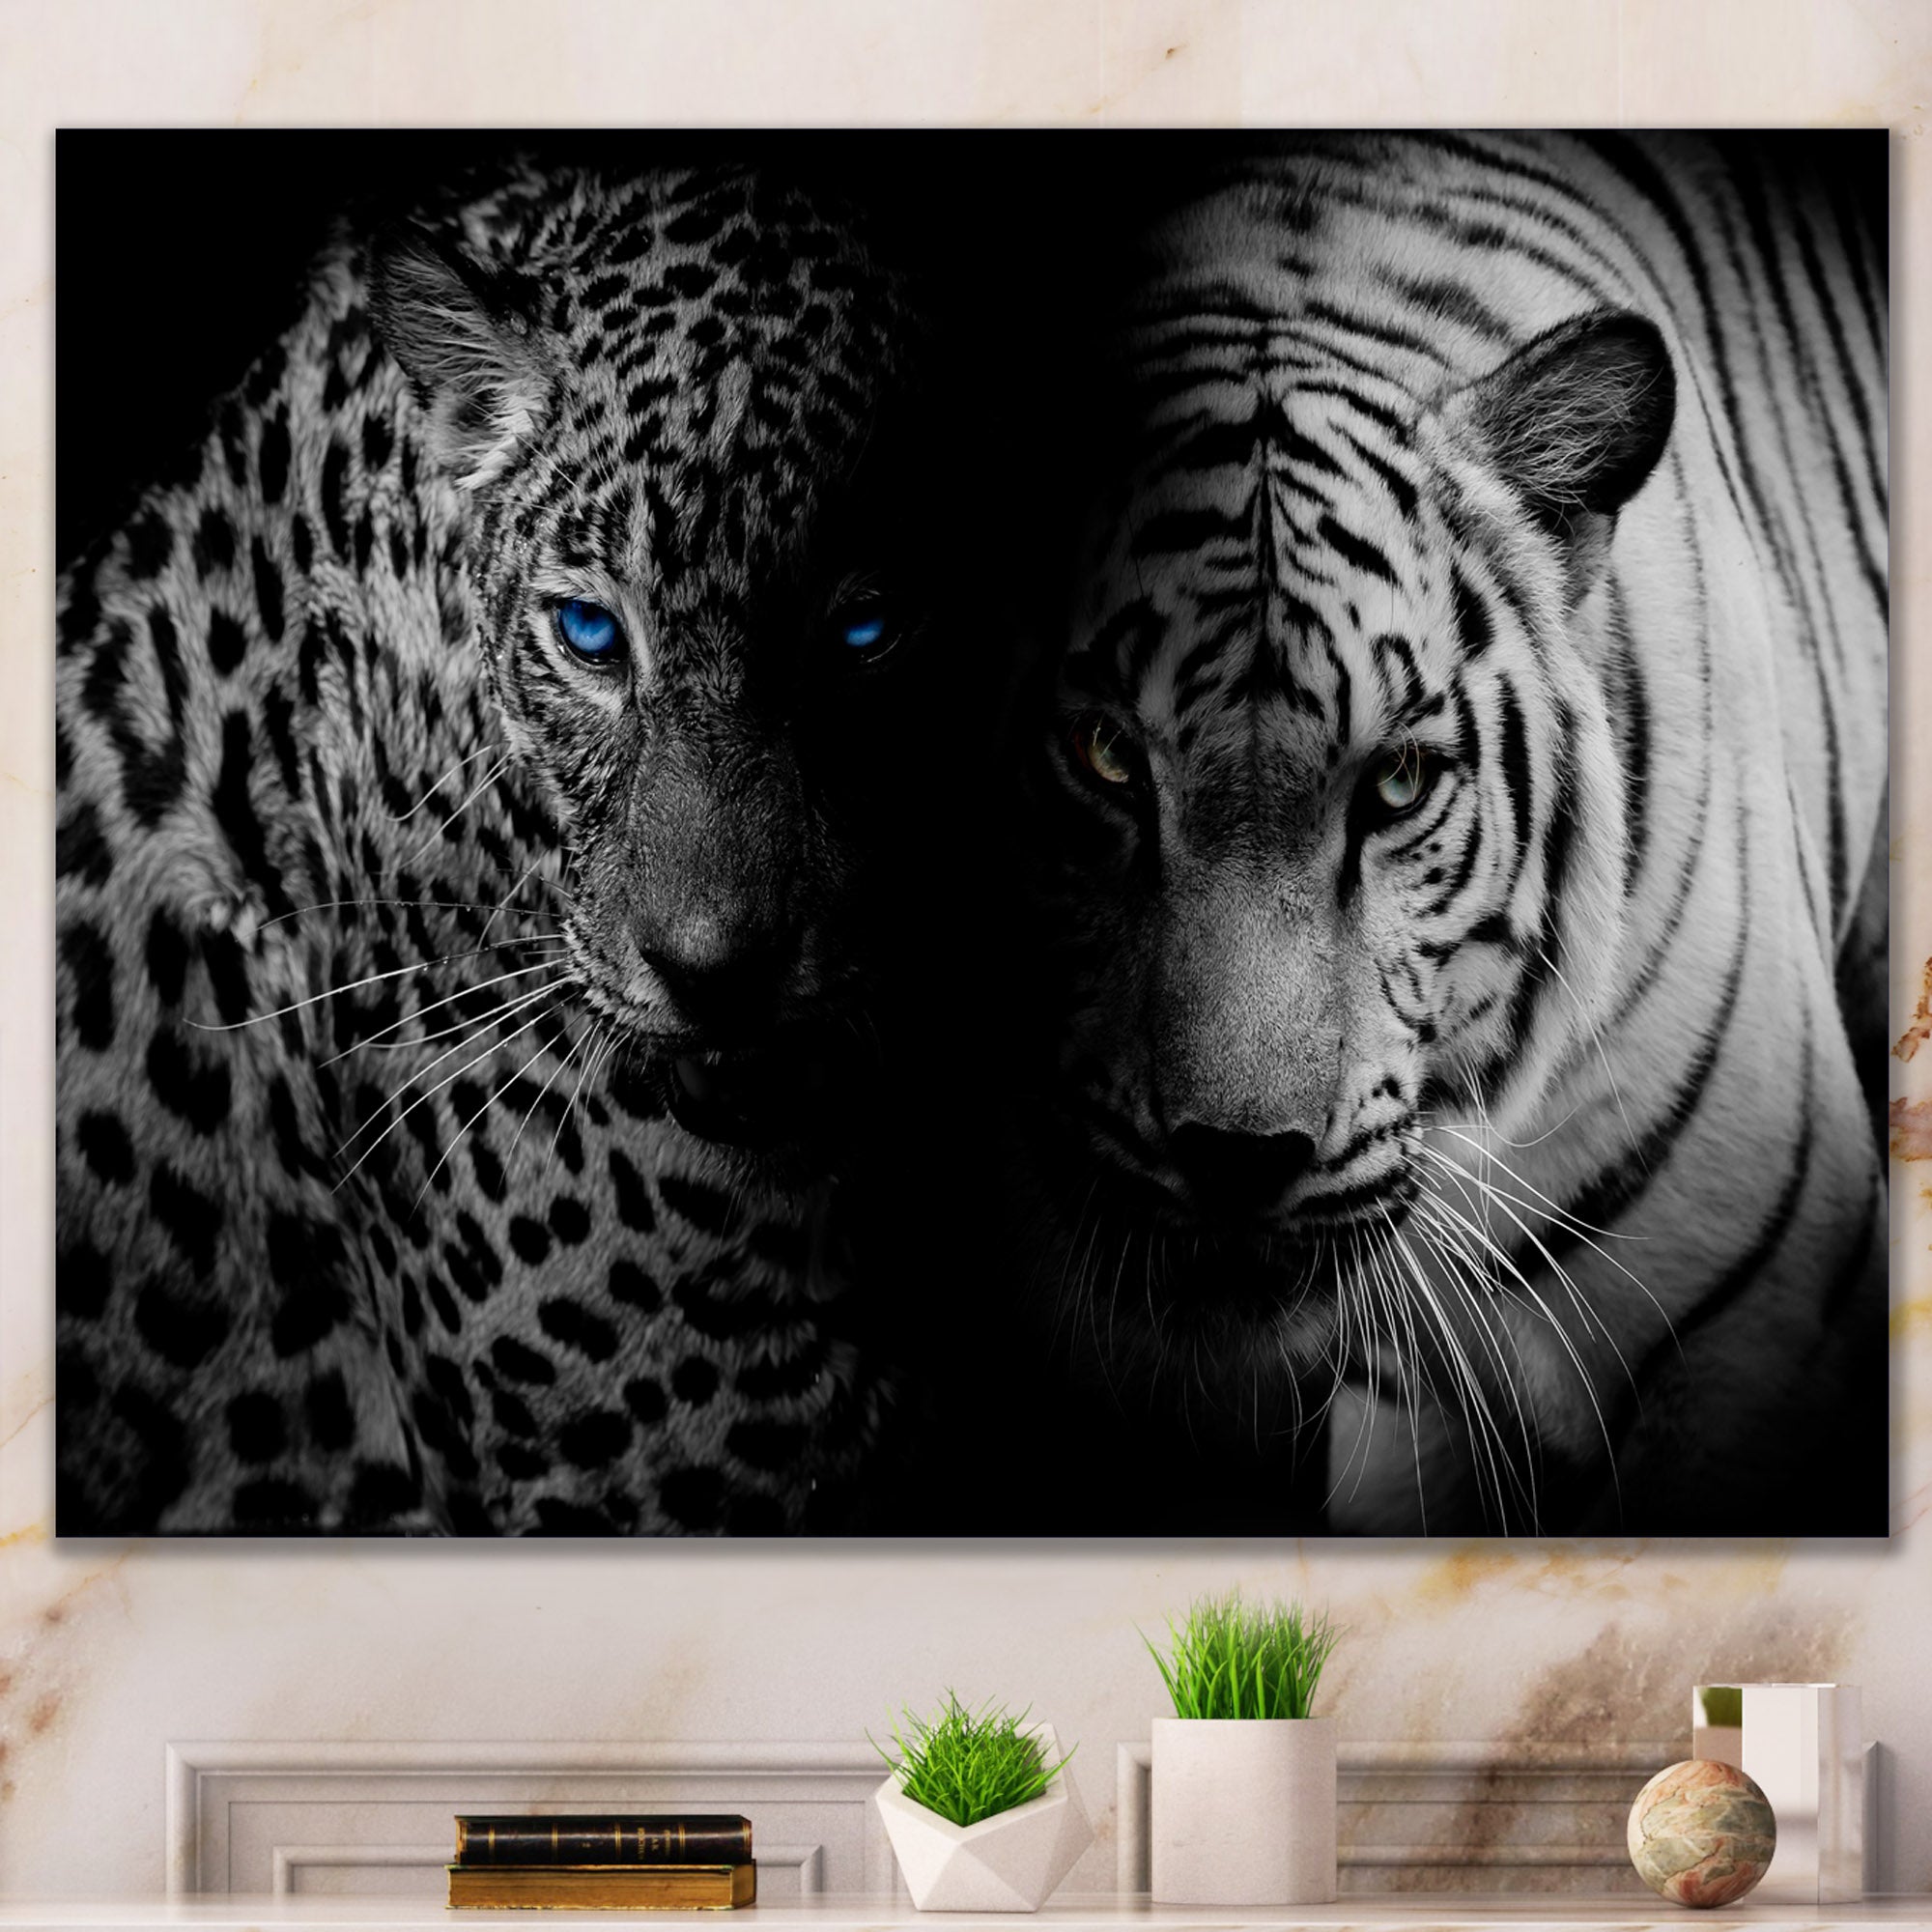 Leopard and Tiger in Black